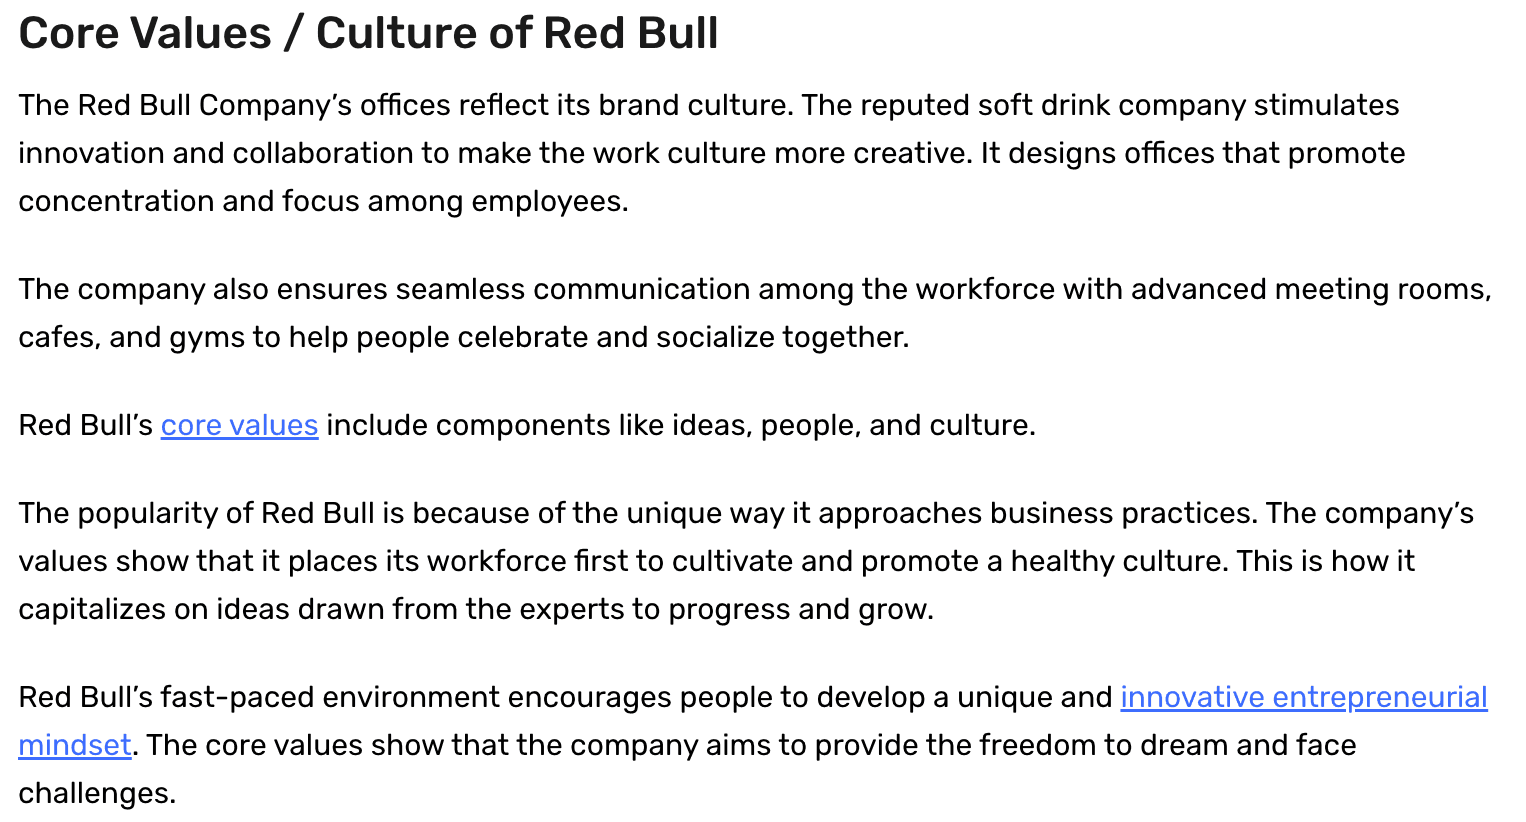 Red Bulls simple core values stated as ideas, people, and culture.